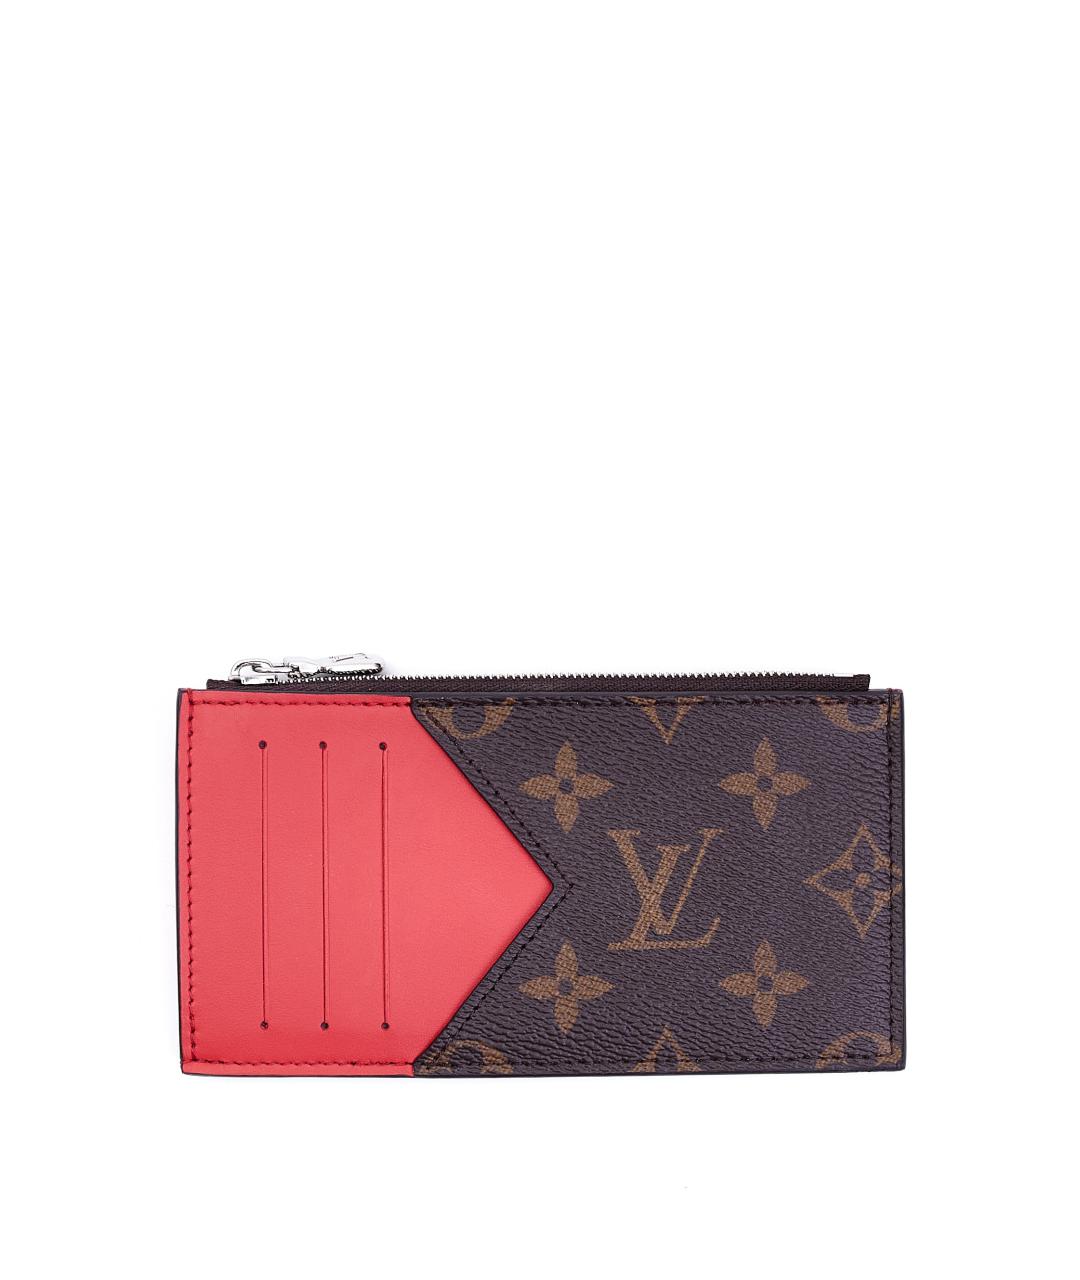 LOUIS VUITTON PRE-OWNED Коричневый кардхолдер, фото 2